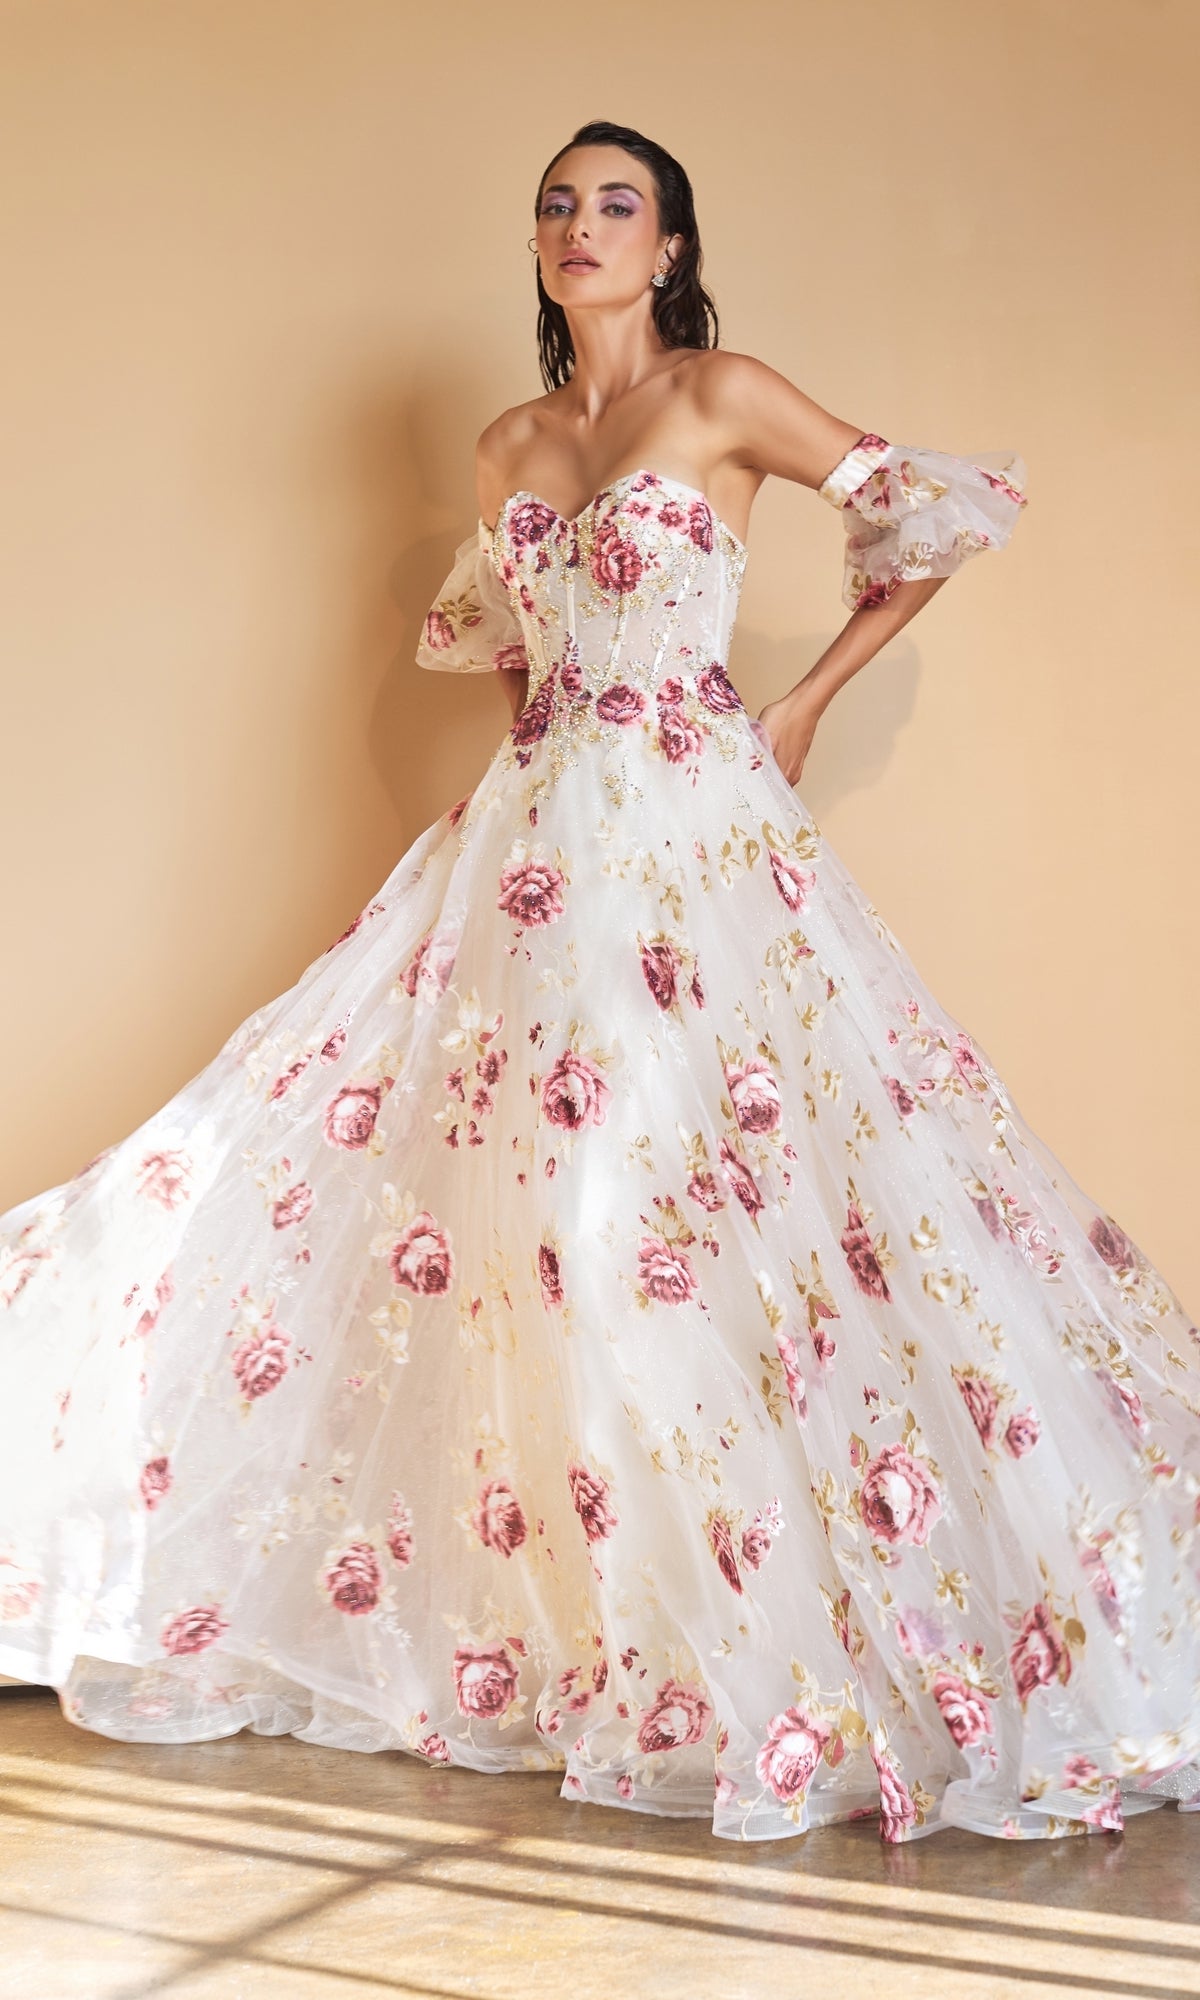 Floral Wedding Dresses: 15 Gowns For Your Magic Party | Wedding dress  guide, Floral wedding dress, Colored wedding dresses